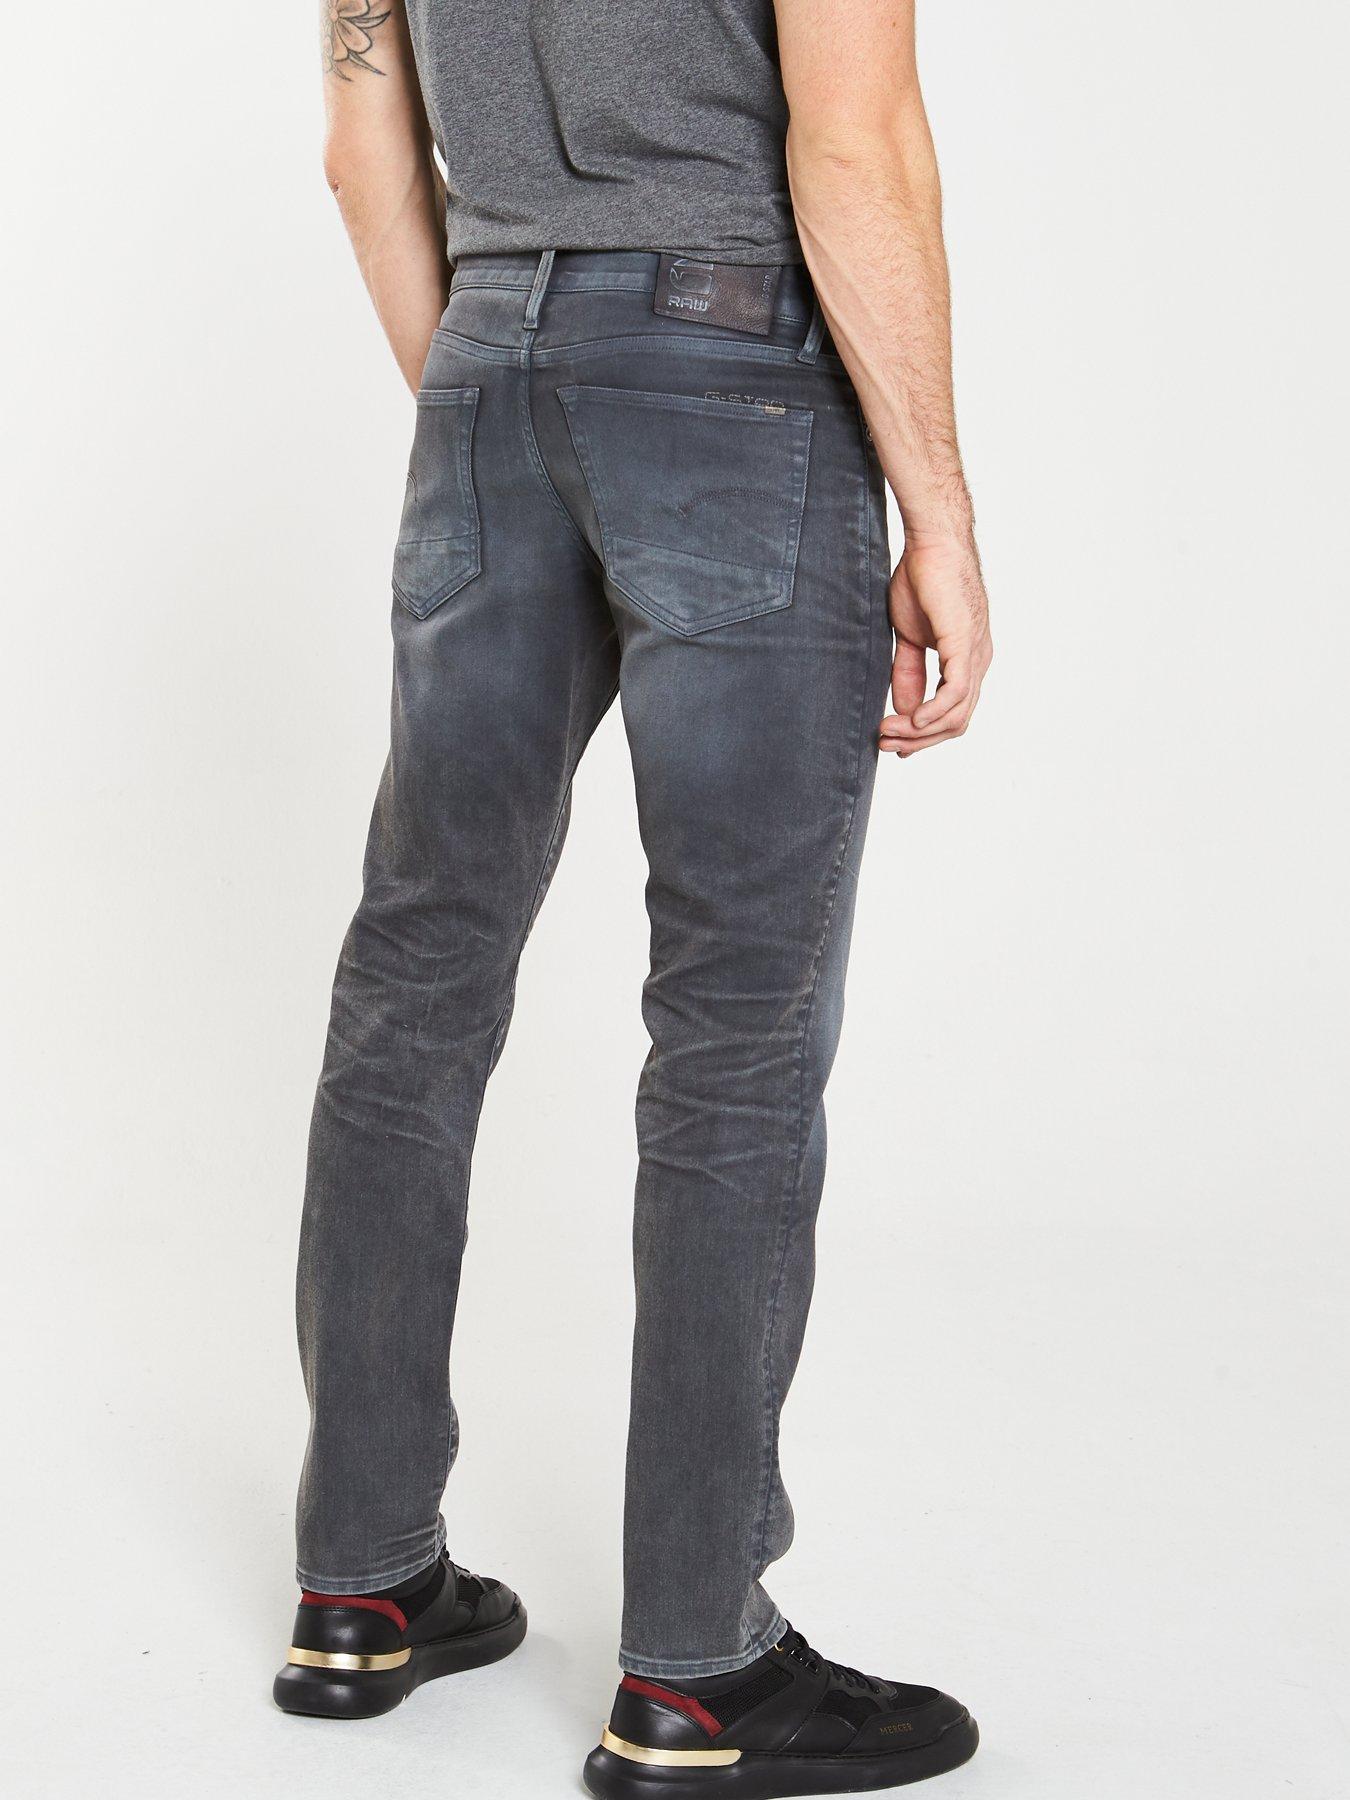 gray g star jeans